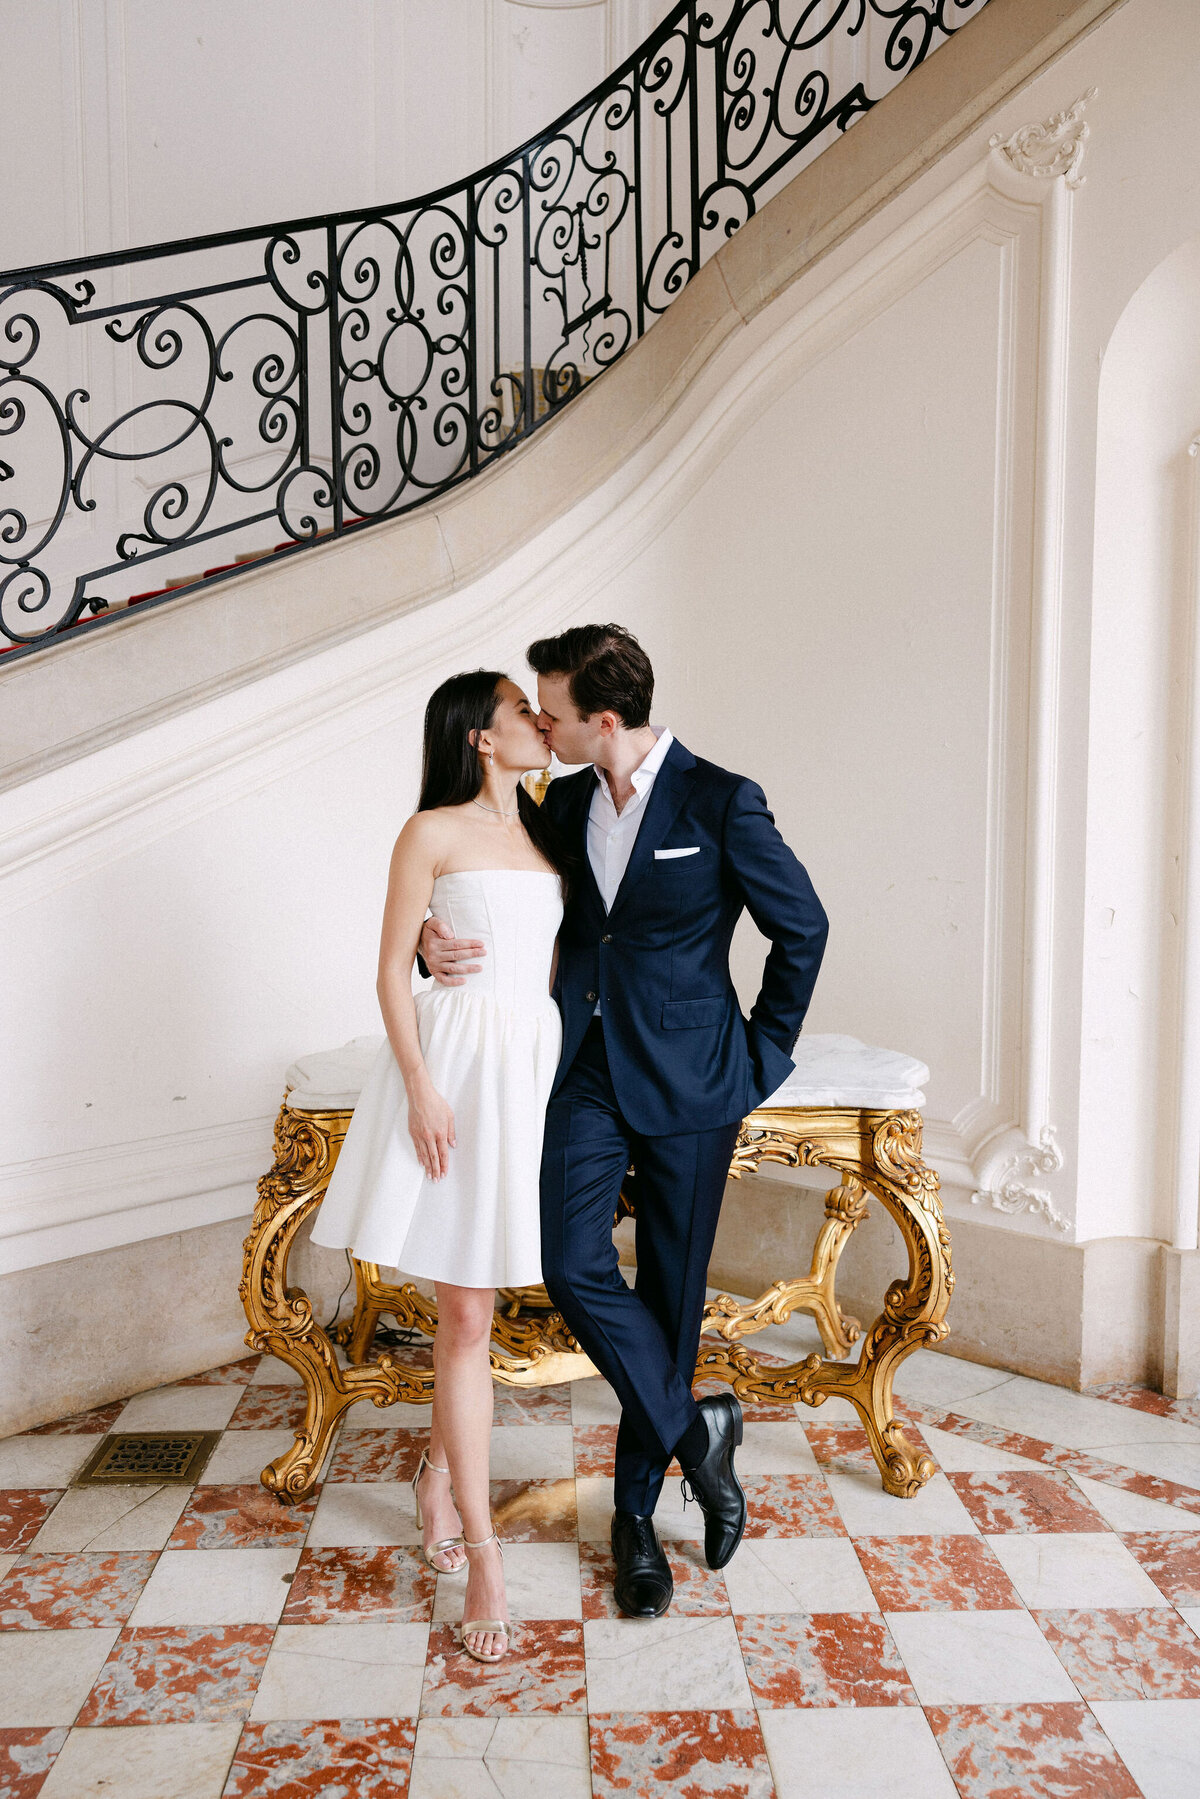 Jennifer Fox Weddings English speaking wedding planning & design agency in France crafting refined and bespoke weddings and celebrations Provence, Paris and destination 13